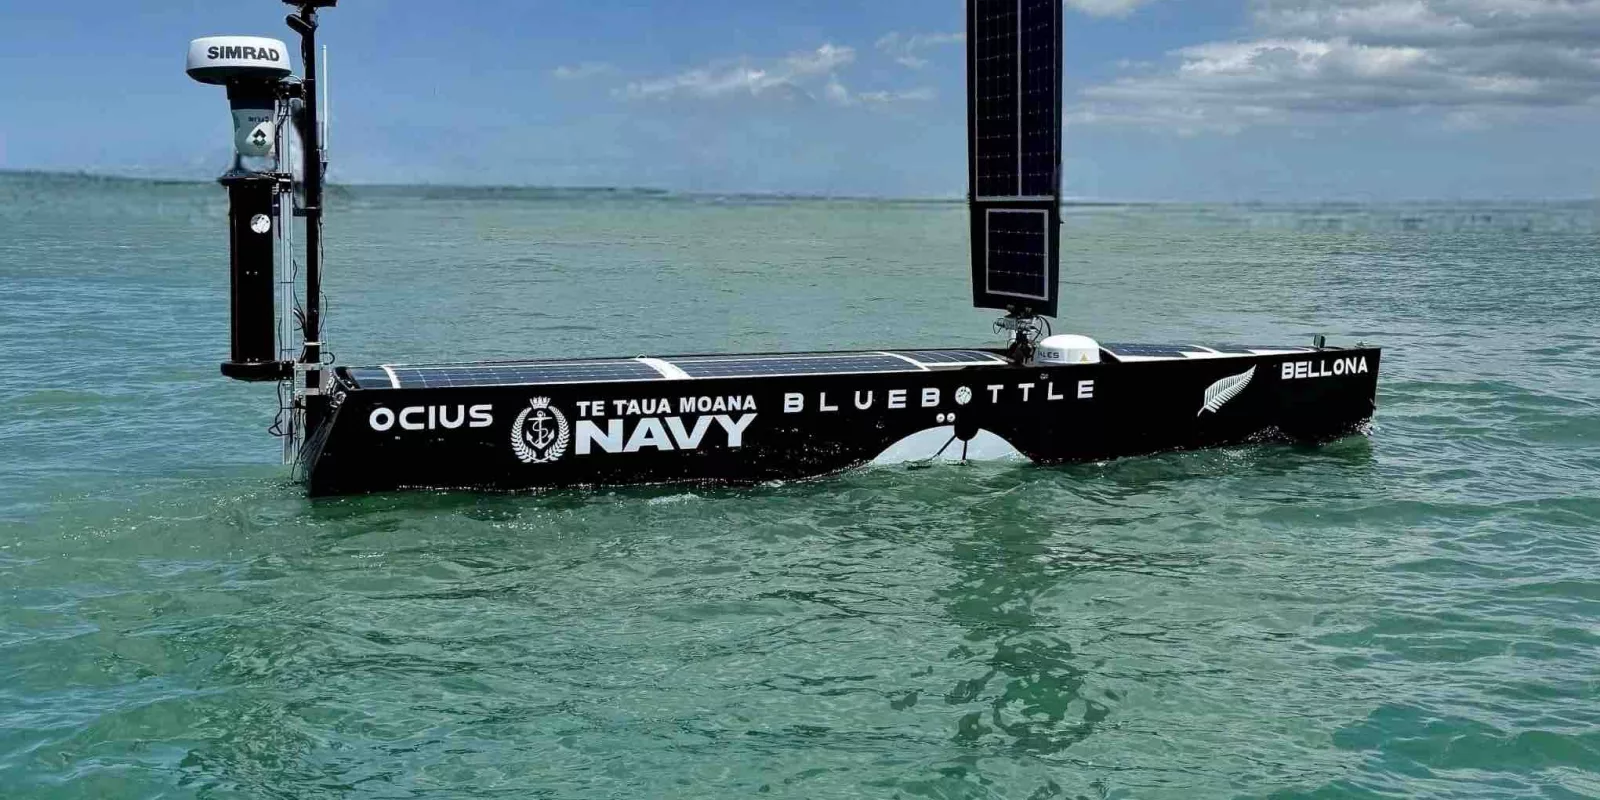 NZDF's uncrewed vessel, Bellona - a Bluebottle craft made by Sydney-based Ocius.